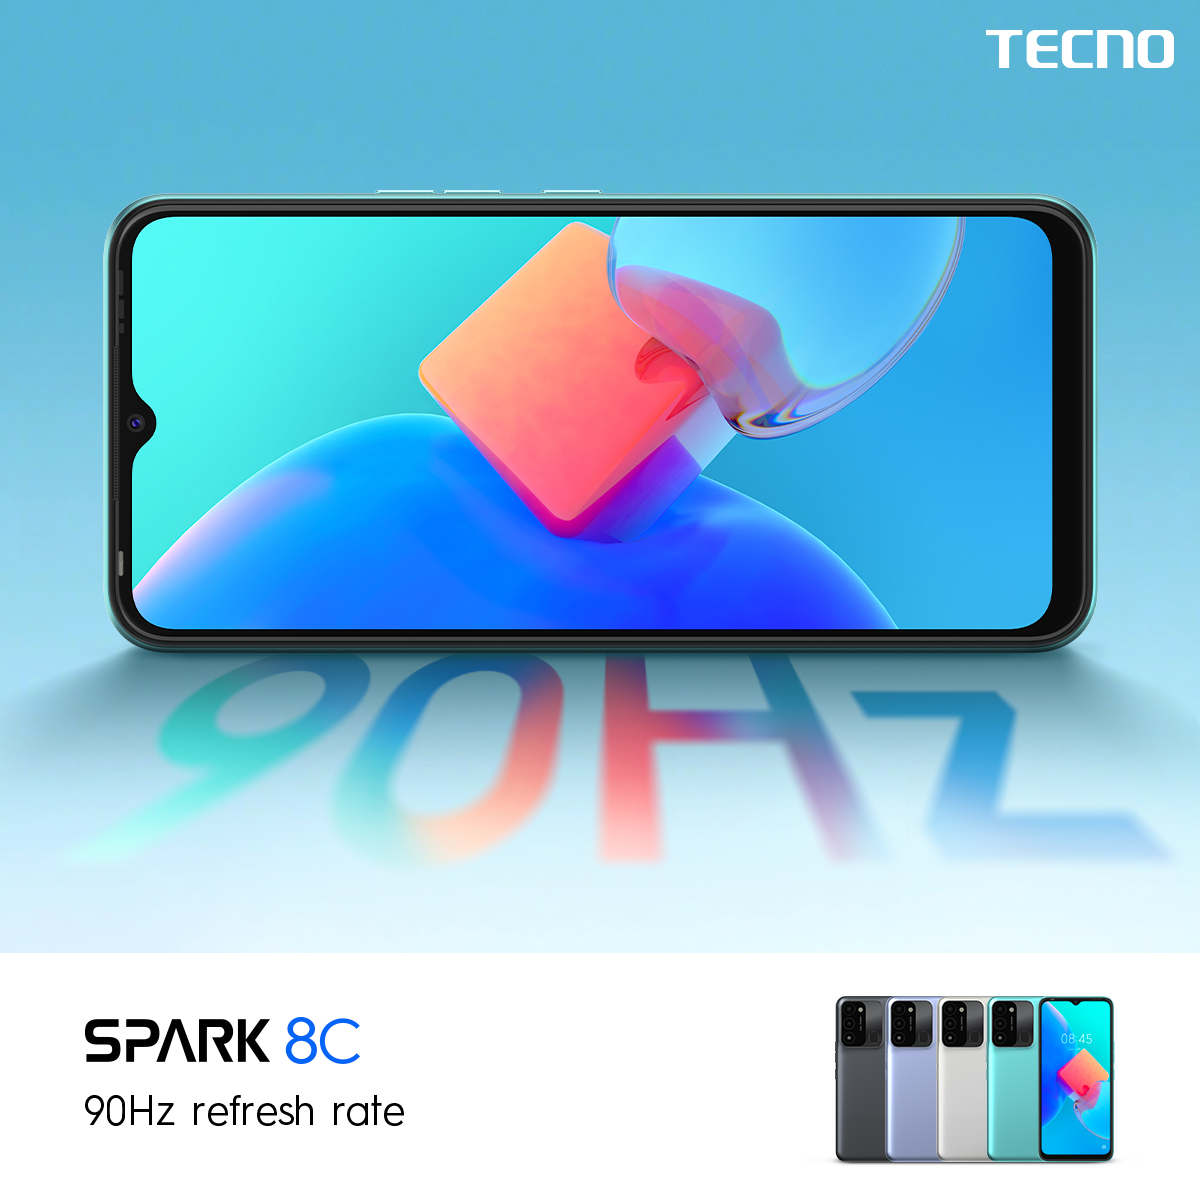 Get smooth performance and a better experience with a 90Hz refresh rate of #TecnoSpark8C!

#SPARK8C #TECNOAfghanistan